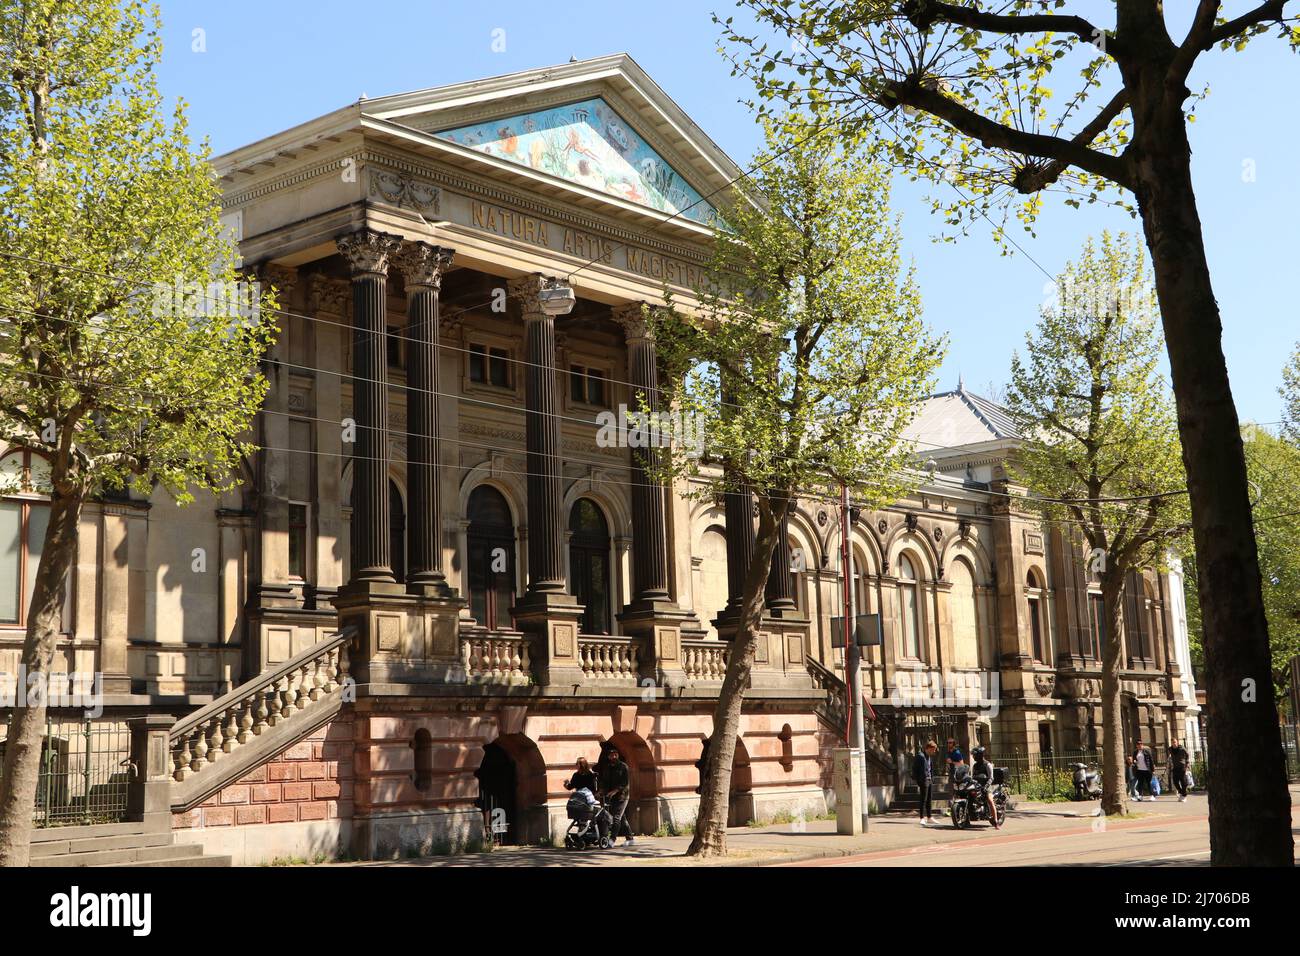 Aquarium building of Artis Zoo in Amsterdam, the Netherlands, May 2022 Stock Photo